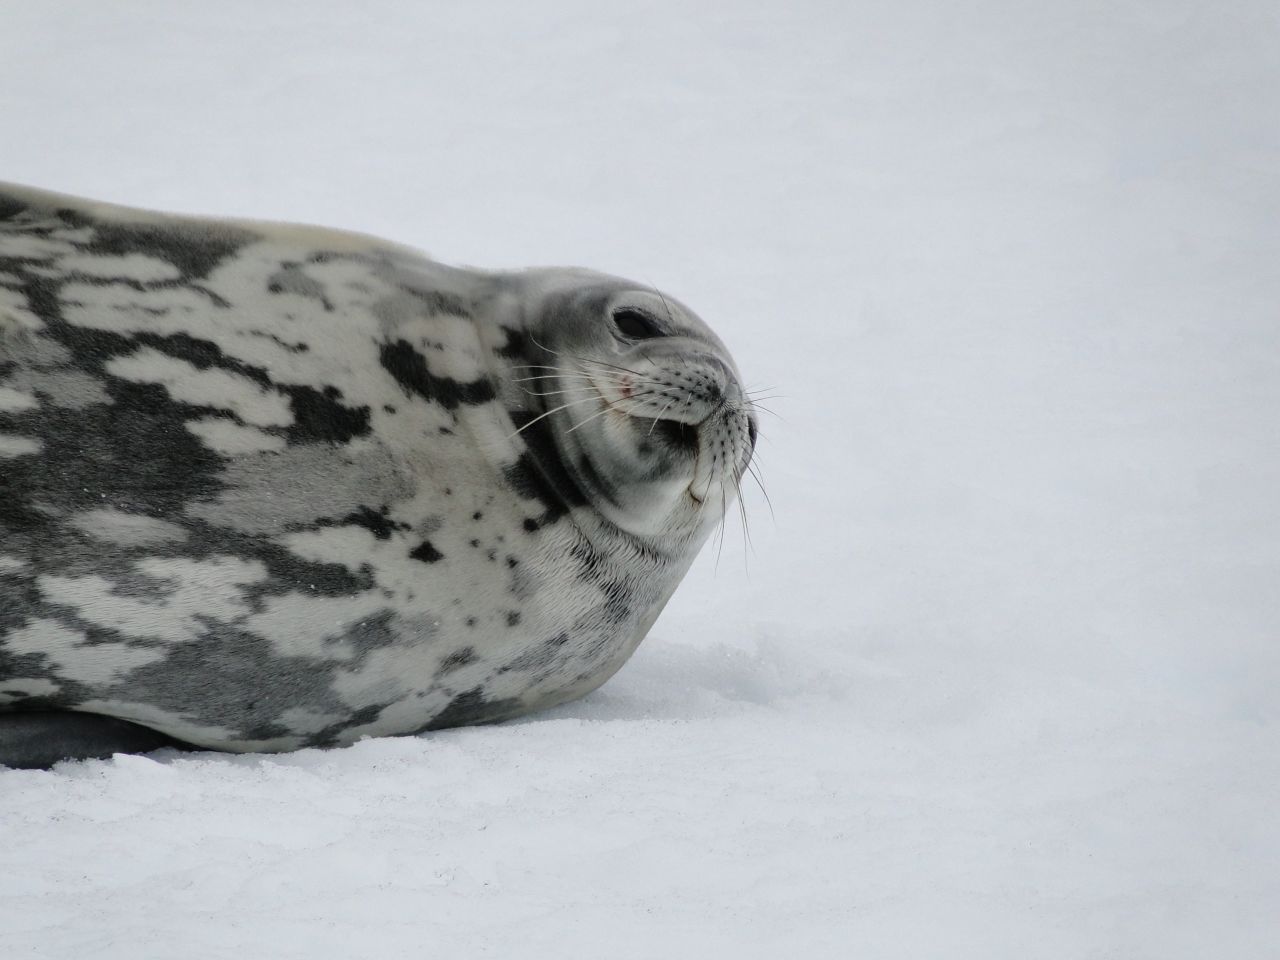 Unlike crabeater seals, weddell seals are extremely placid and can be approached without causing much apparent stress. This one seemed quite happy to pose for a photograph.